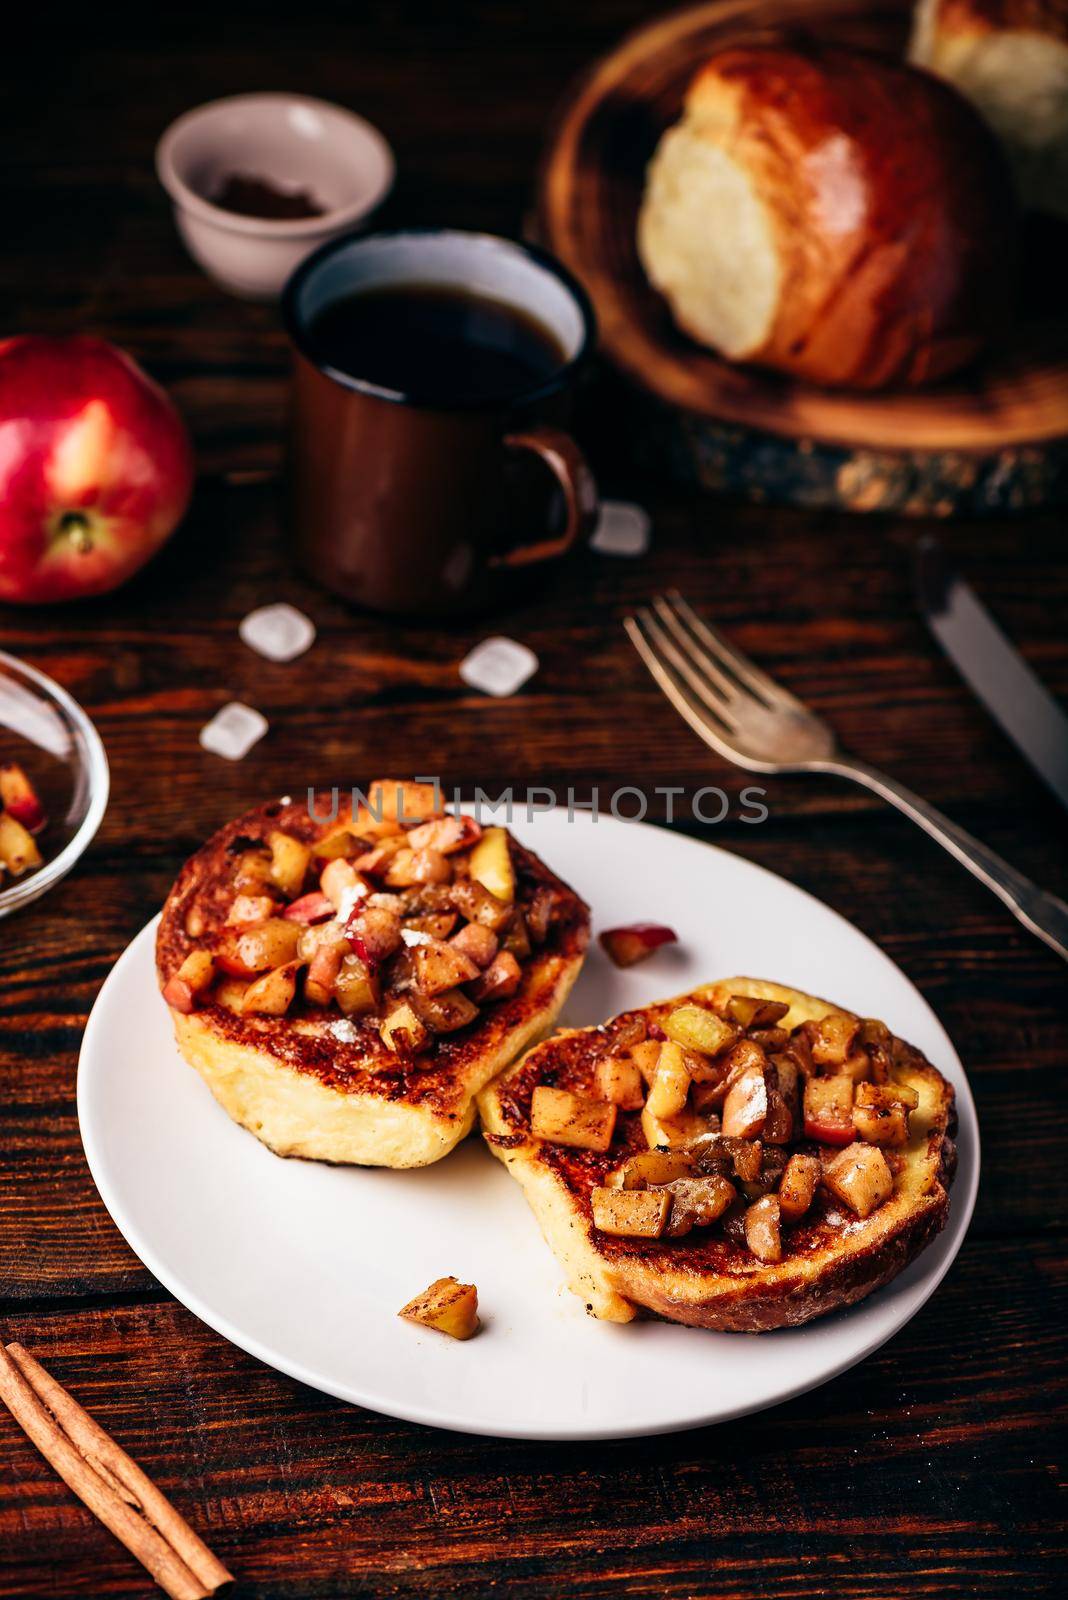 French toasts with apple and cinnamon by Seva_blsv